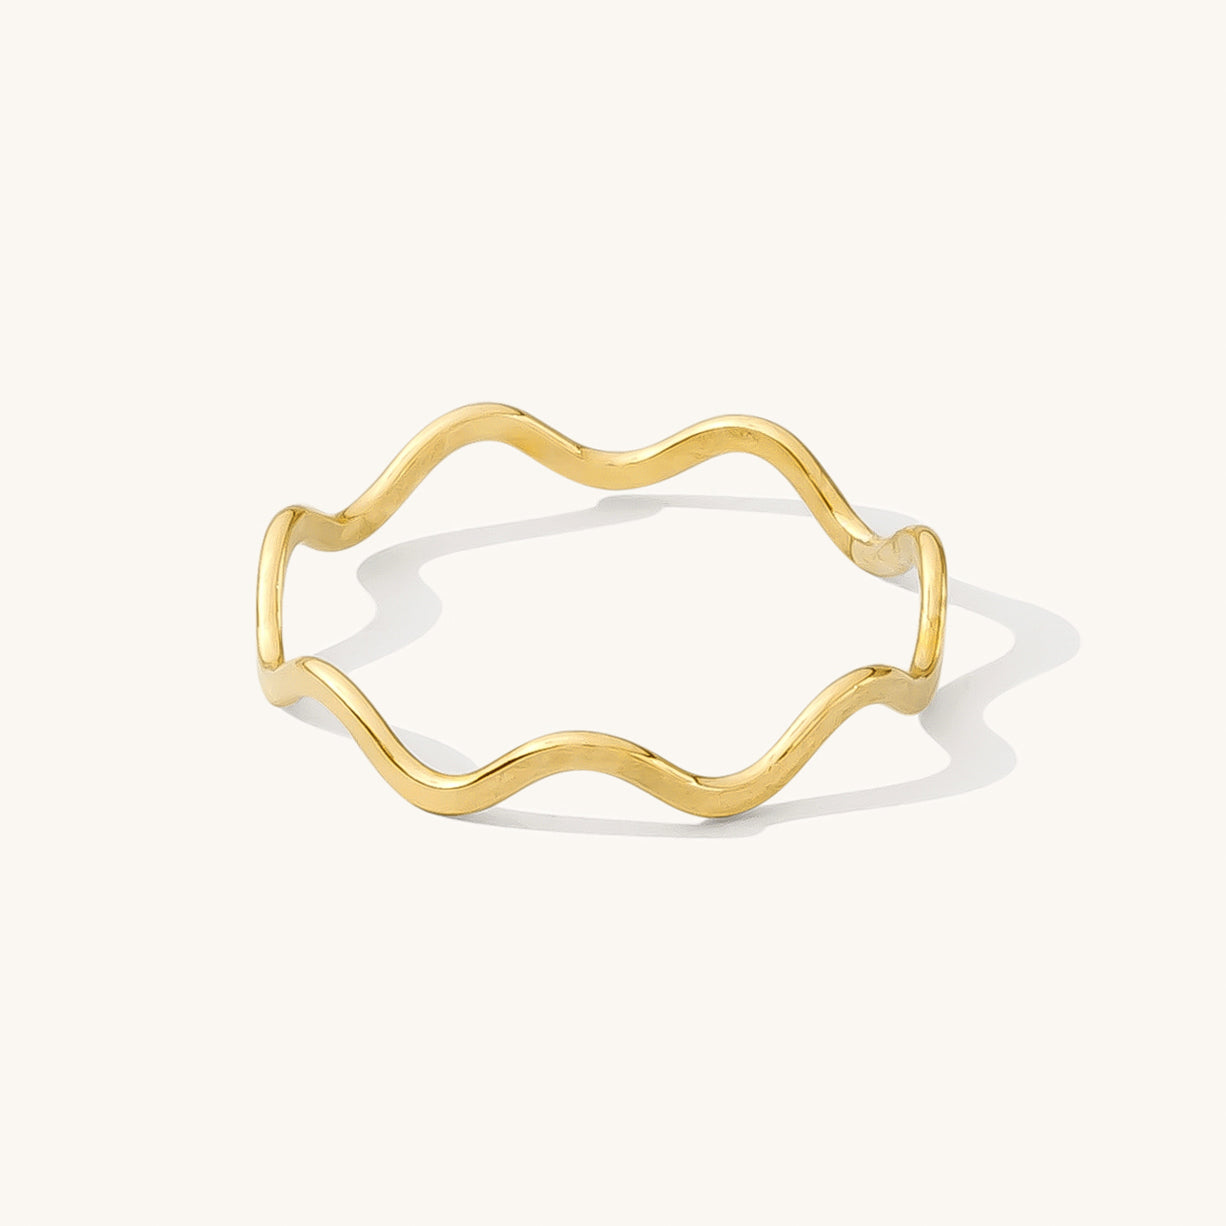 Wavy Ring - Gold Filled / Size 5